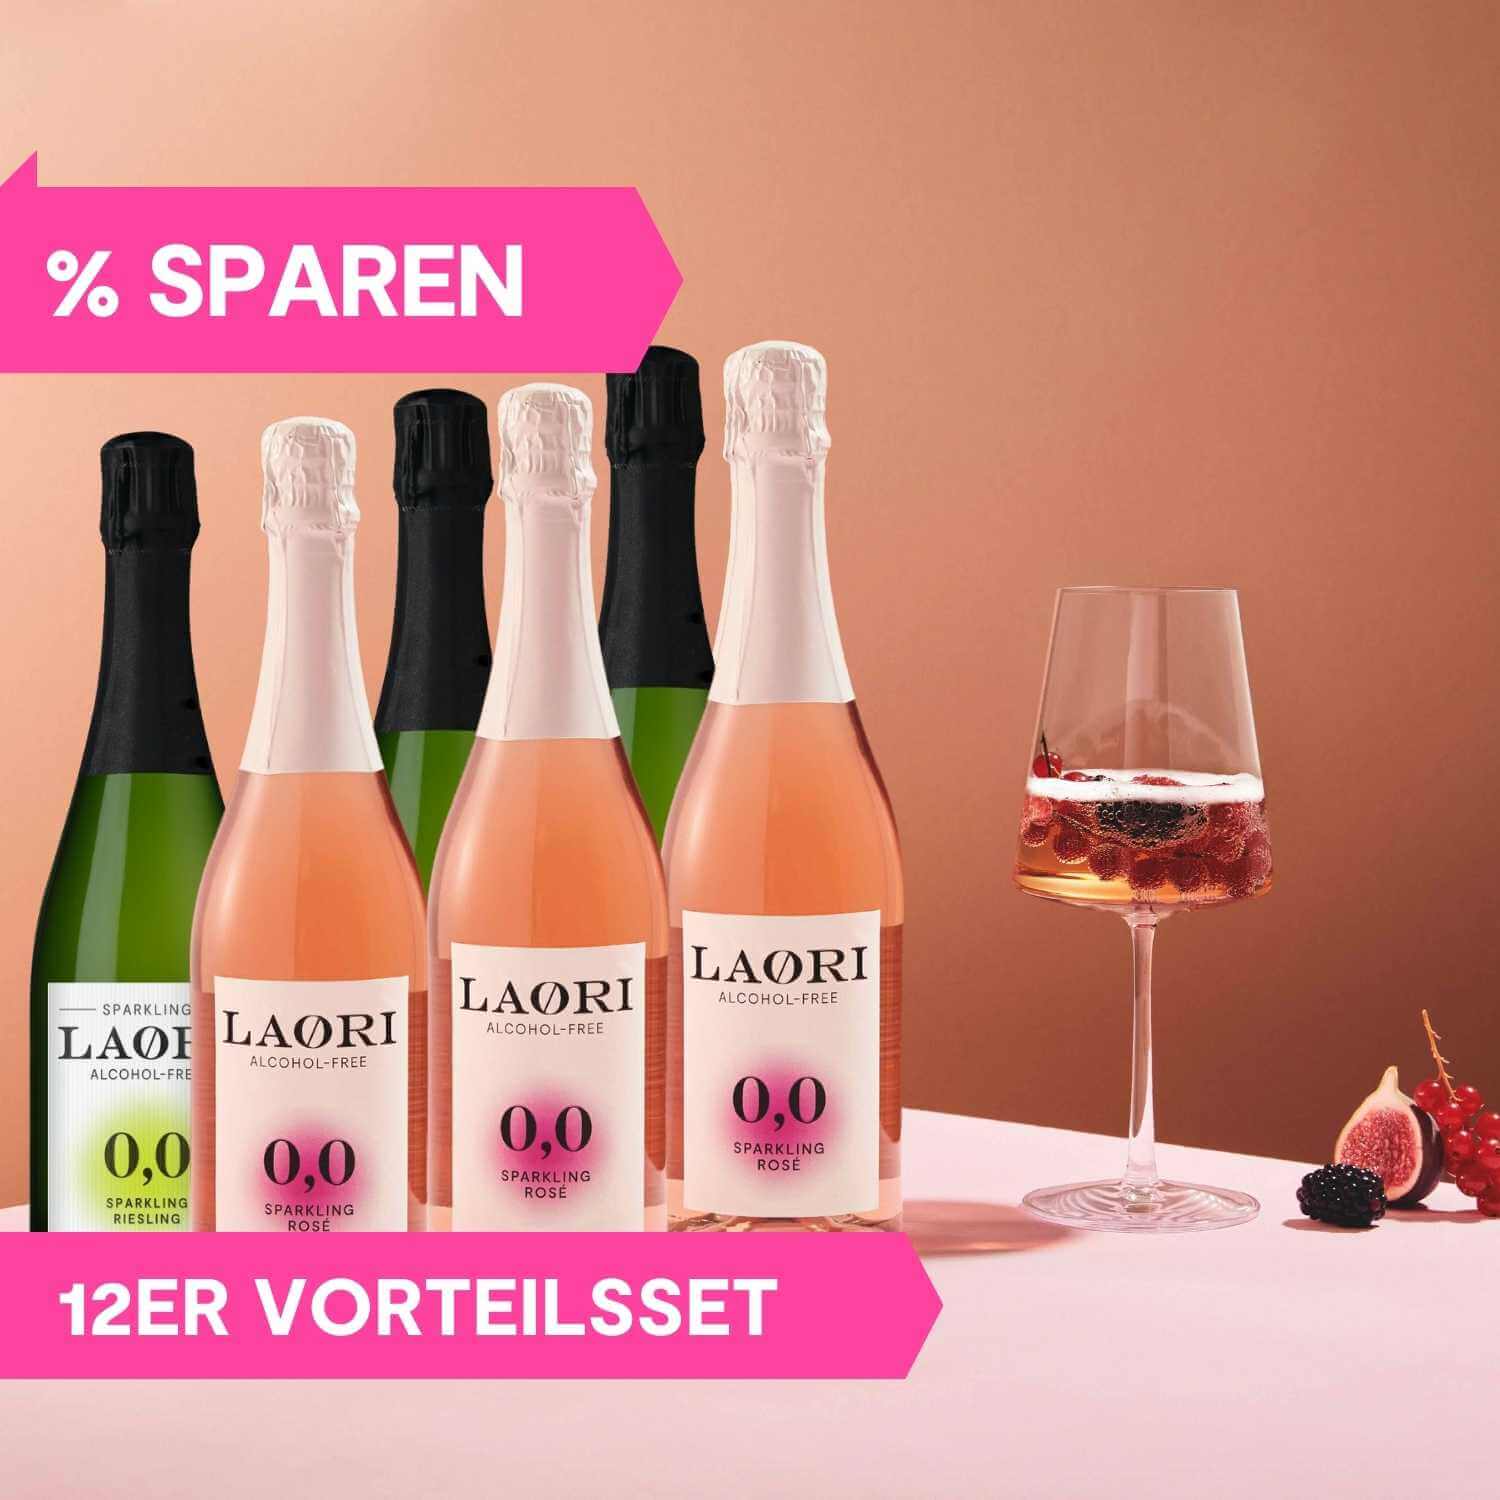 Ultimate Collection X 12: 6x Sparkling Riesling + 6x Sparkling Rosé (0.75L)